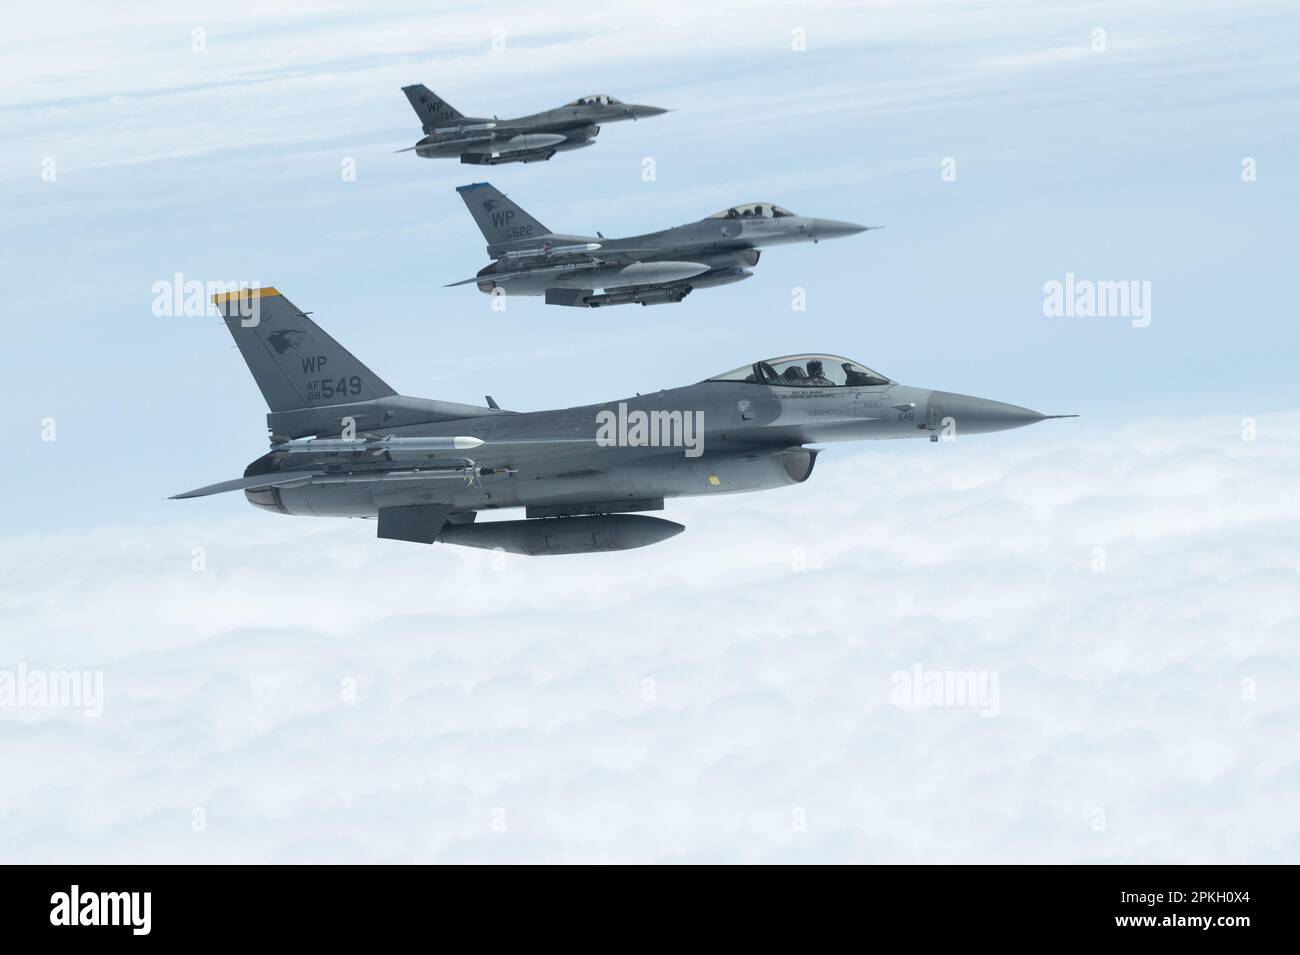 U.S. Air Force F-16 Fighting Falcons assigned to the 8th Fighter Wing, Kunsan Air Base, Republic of Korea, fly alongside a U.S. Air Force KC-135 Stratotanker assigned to the 909th Air Refueling Squadron, Kadena Air Base, Japan, over the Pacific Ocean, April 5, 2023. The U.S. is committed to denying adversarial aggression through strategic airpower aimed to deter and dominate aggressors in any airspace. (U.S. Air Force photo by Senior Airman Yosselin Campos) Stock Photo